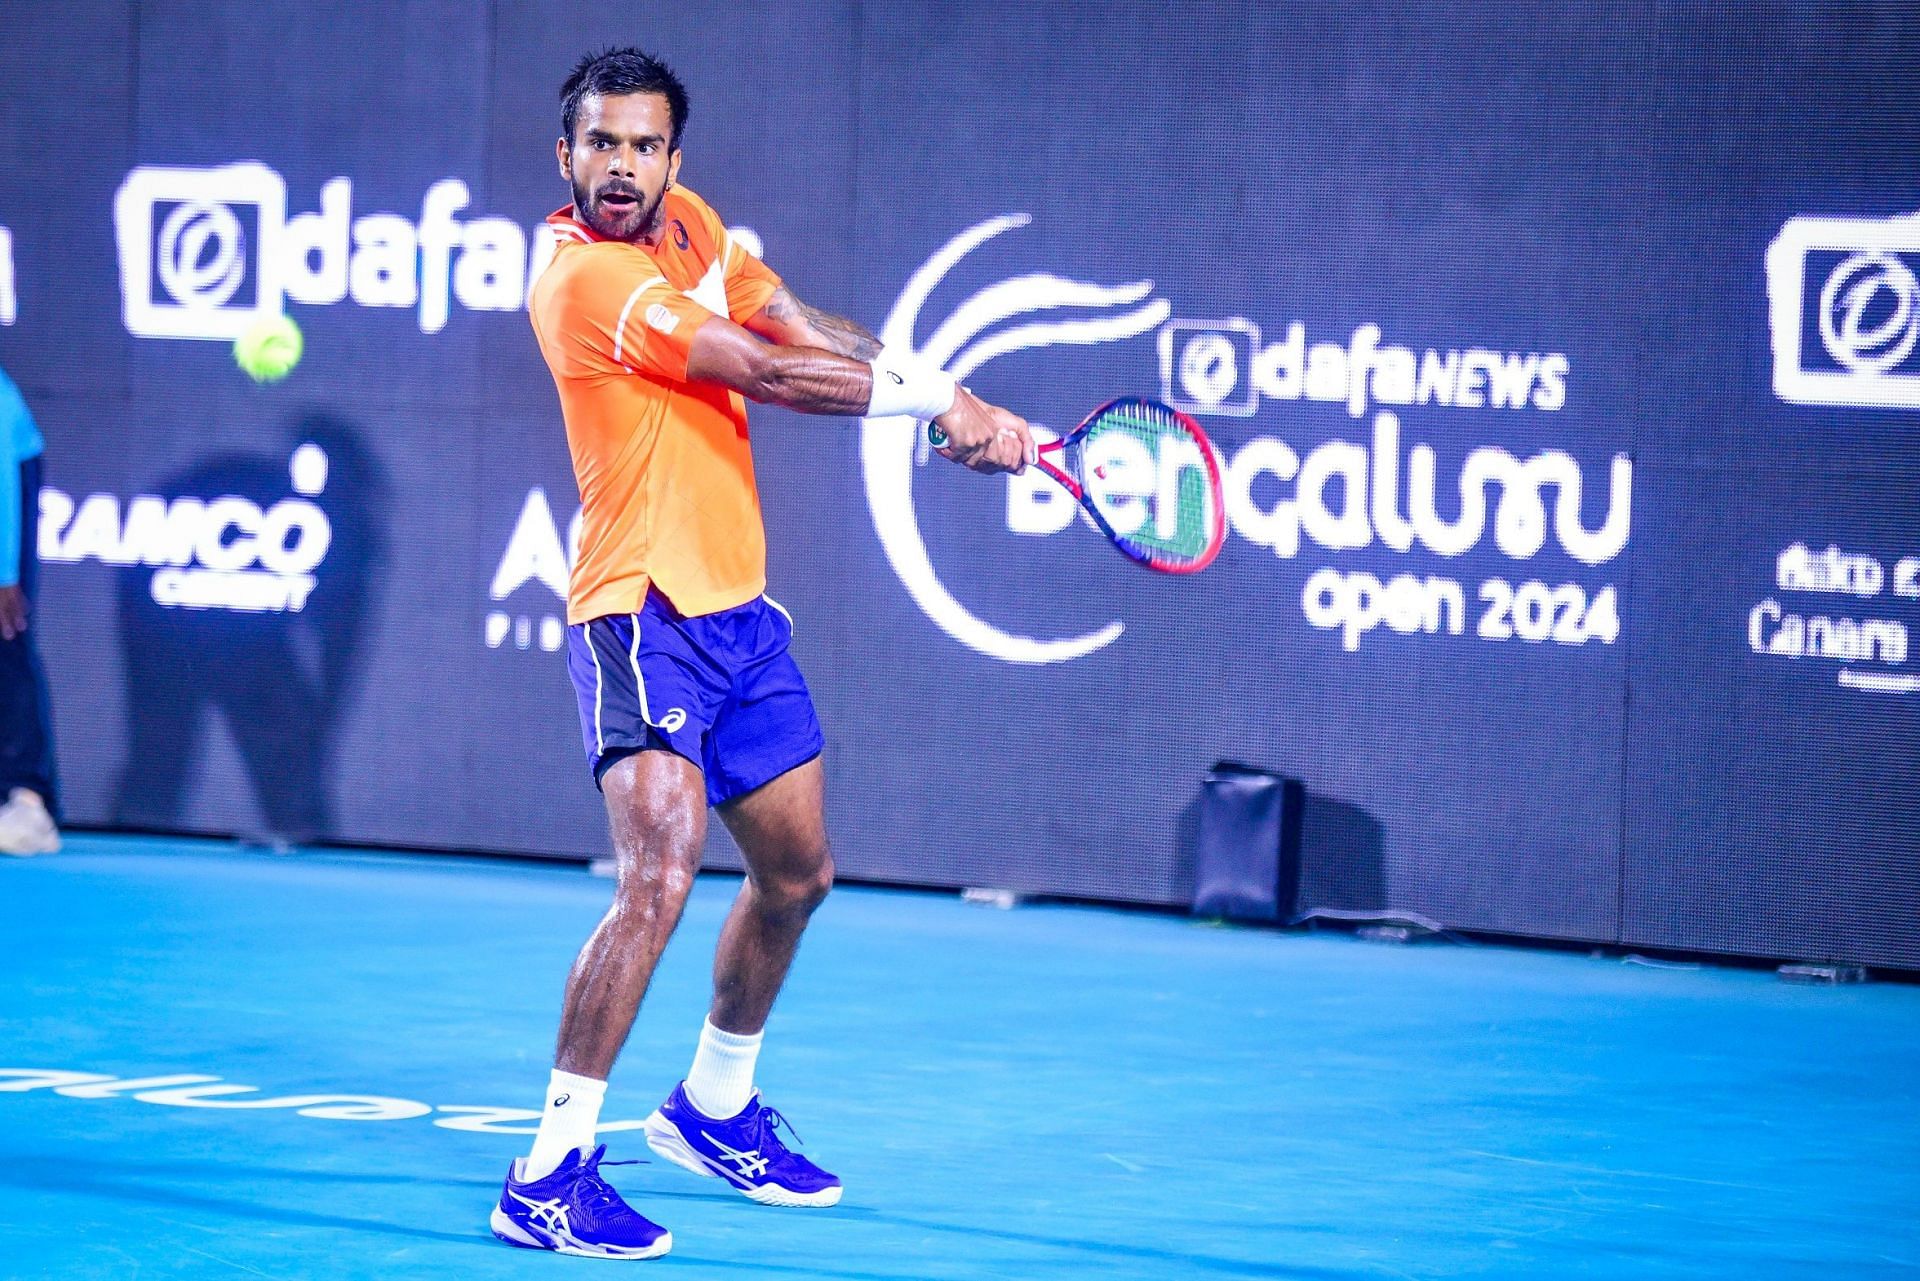 Sumit Nagal in action during the singles quarter final match during the DafaNews Bengaluru Open 2024 on Friday